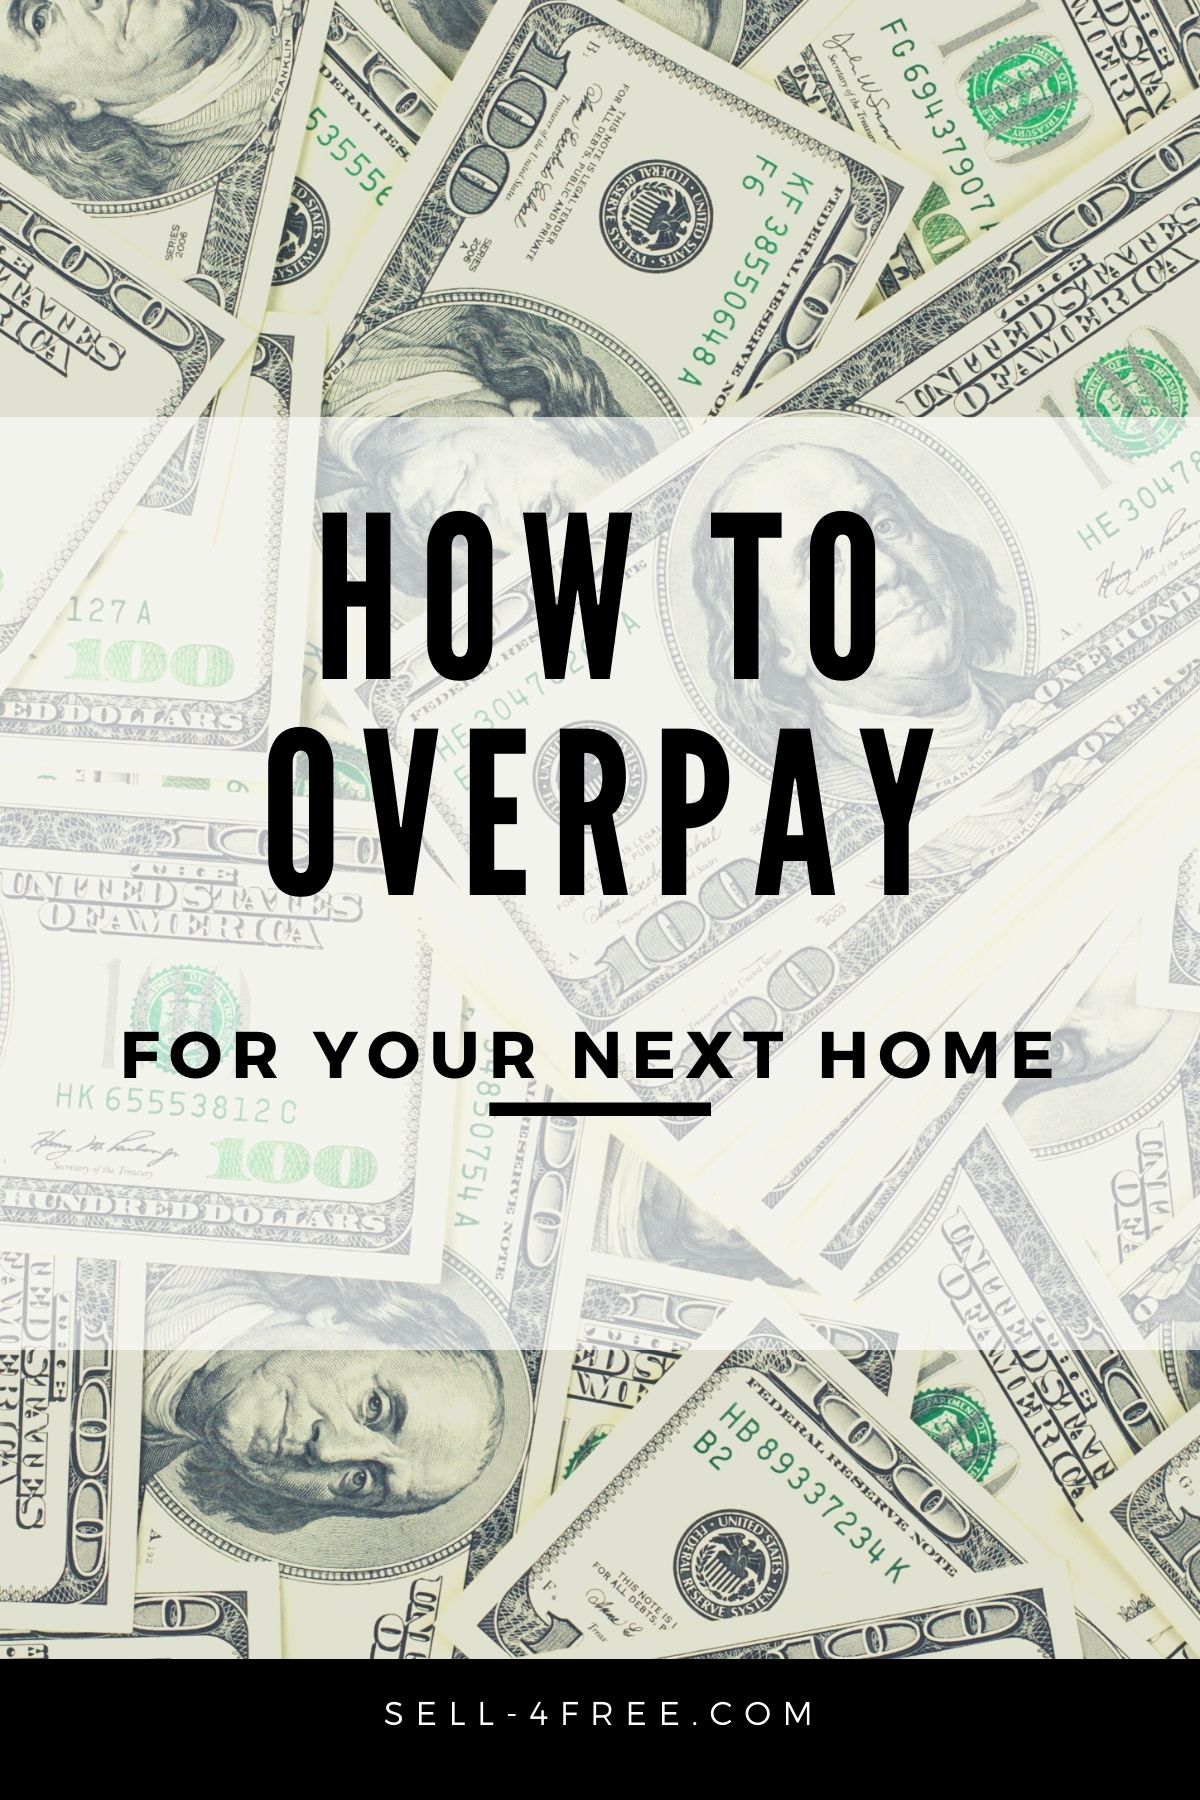 How to Overpay for Your Next Home